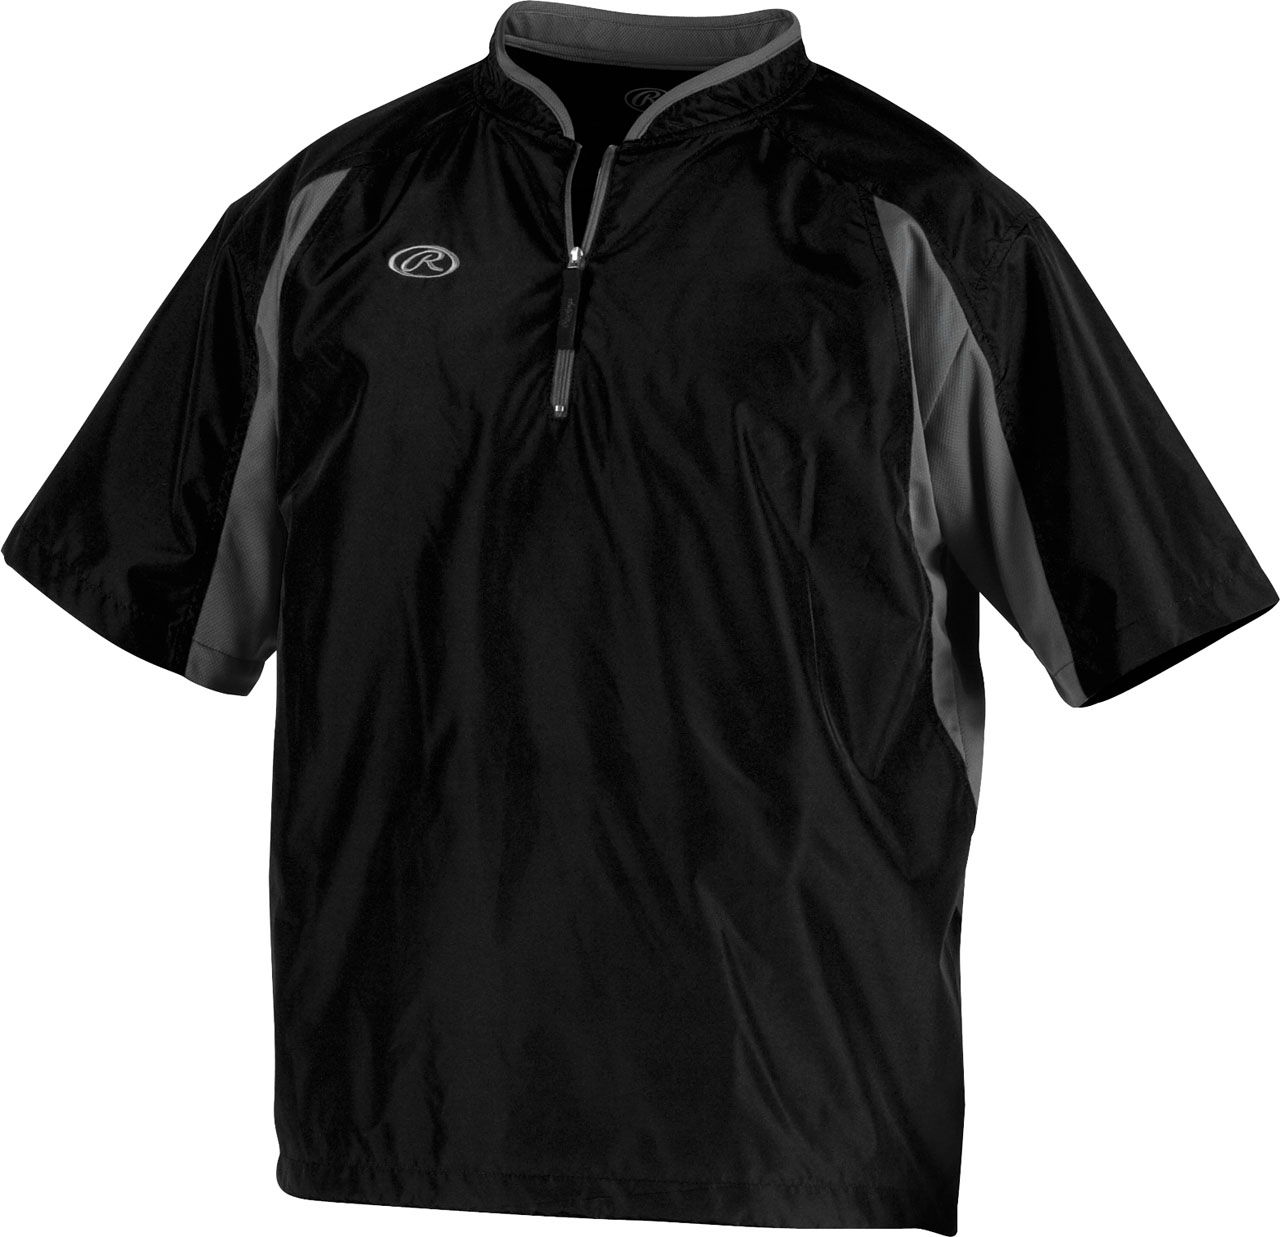 Picture of Rawlings Cage Jacket